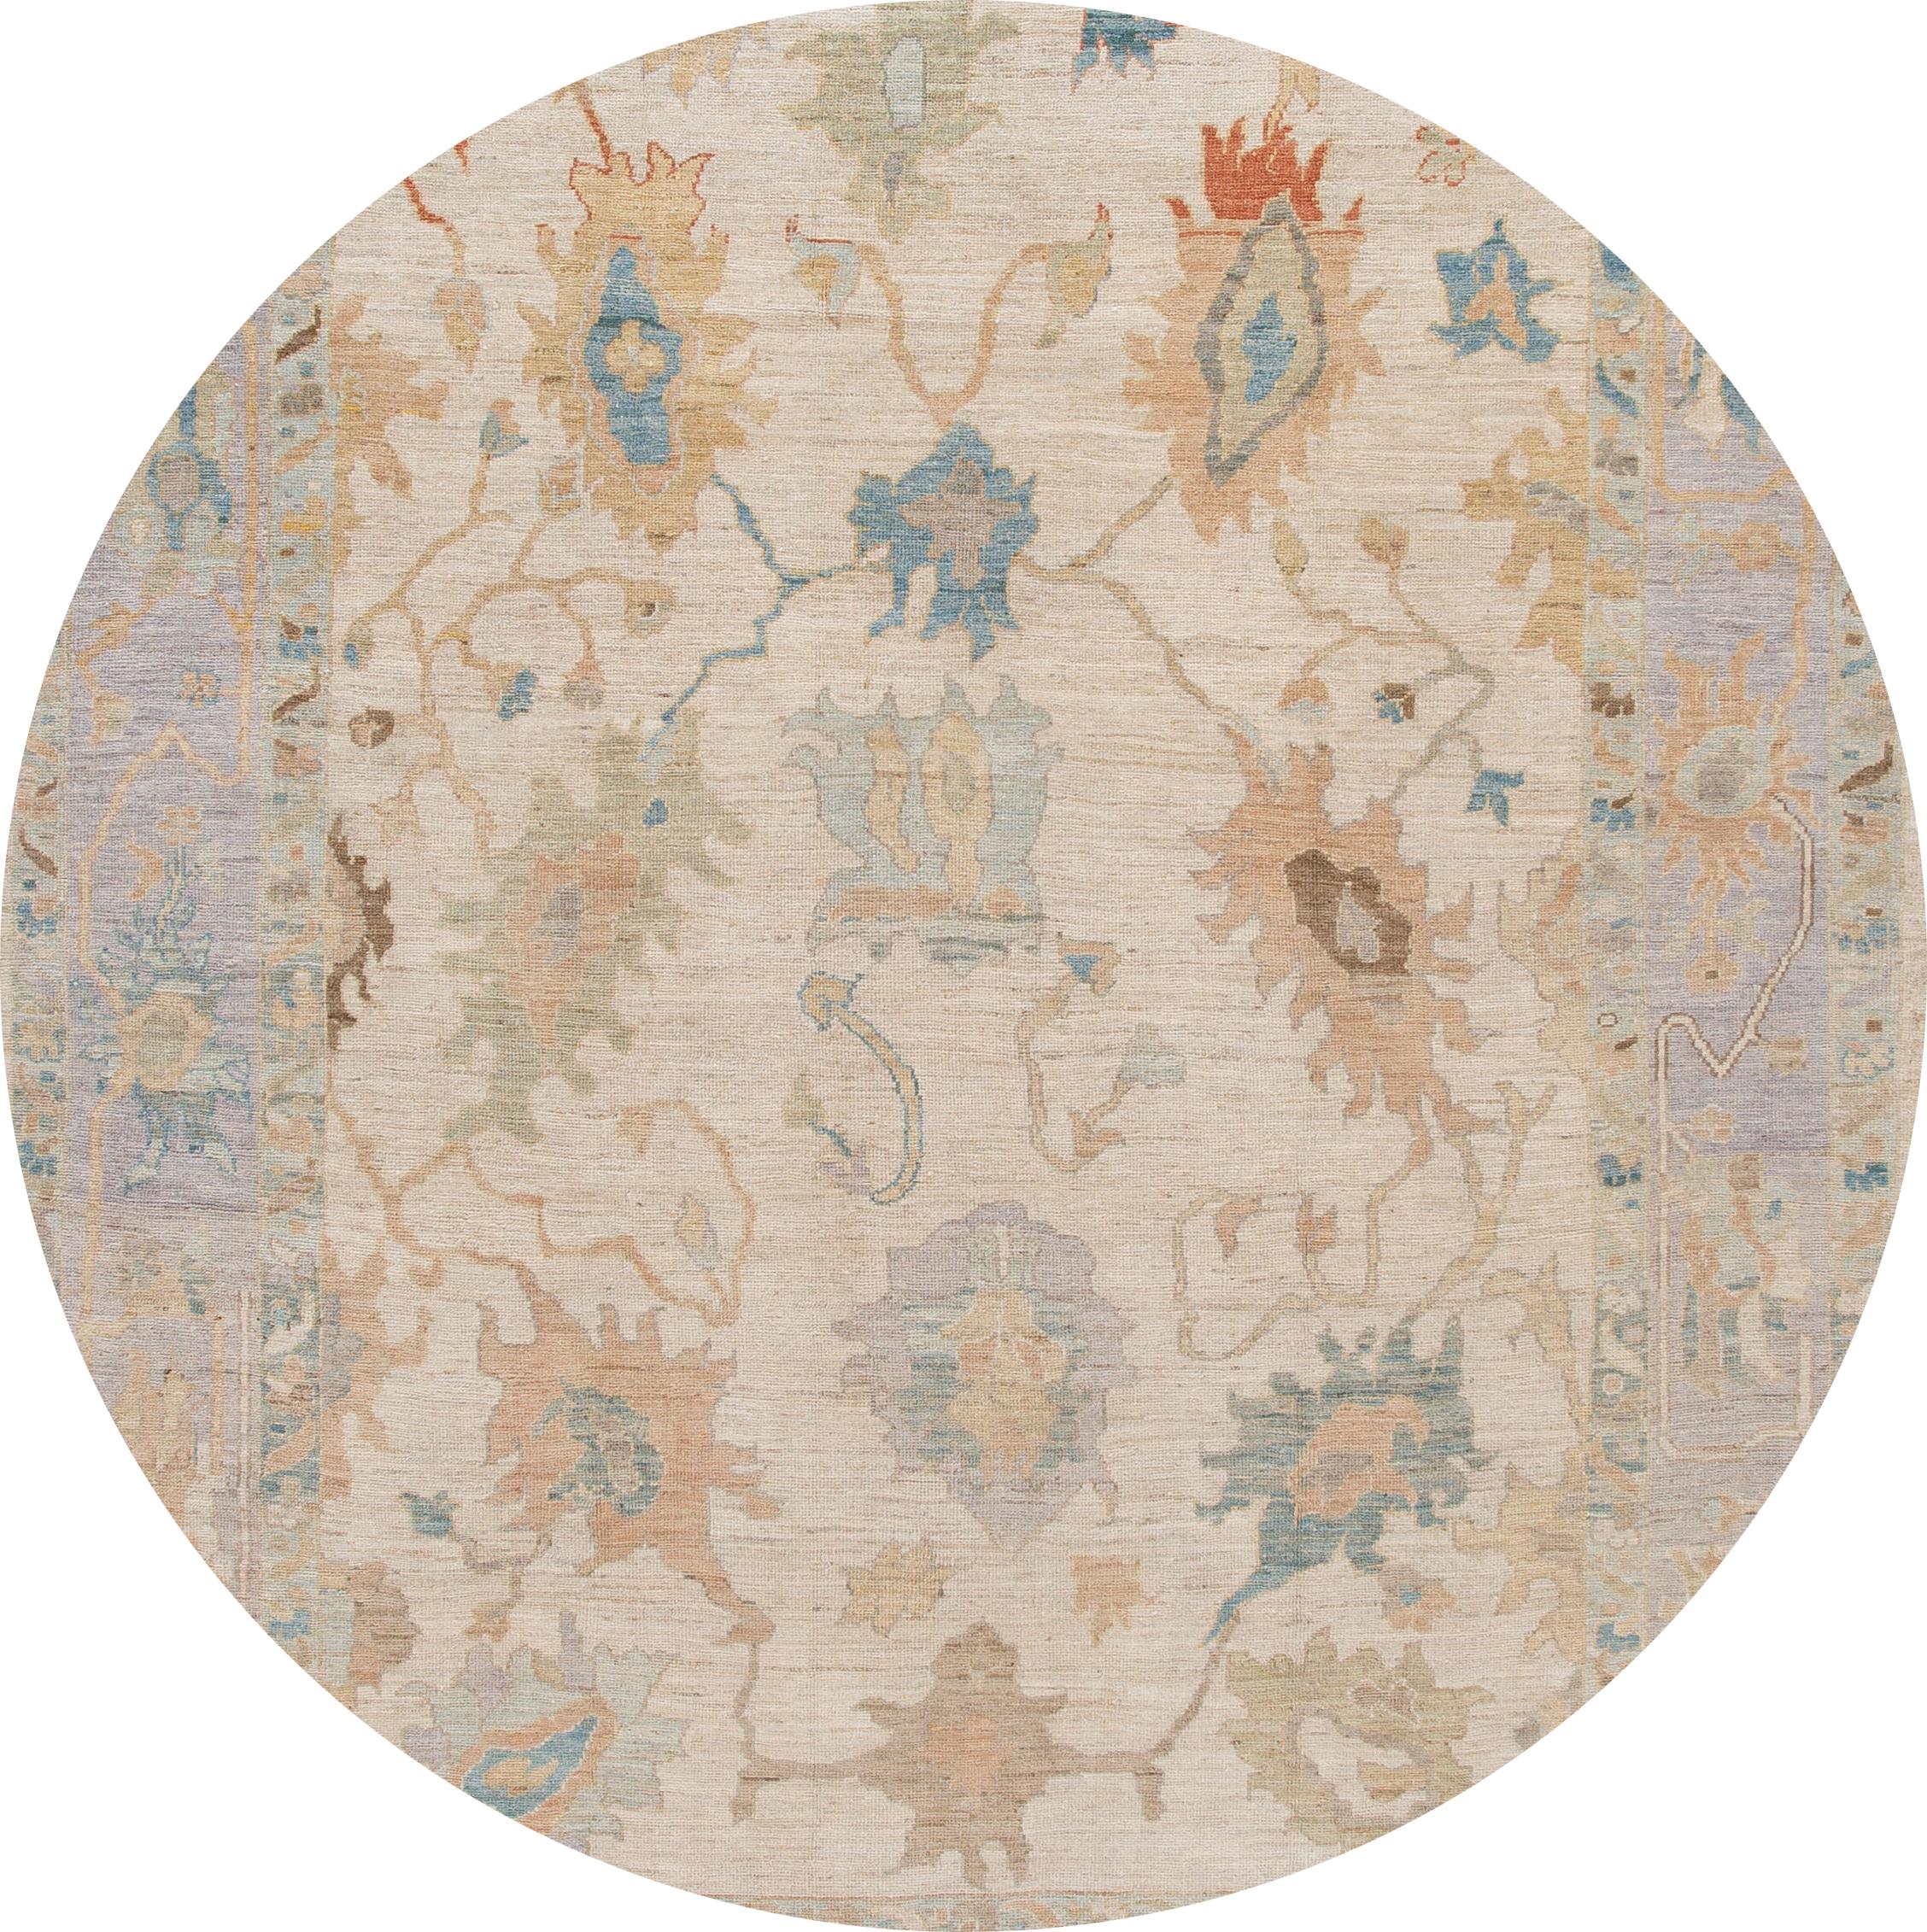 Beautiful contemporary Sultanabad rug, hand knotted wool with an ivory field. This rug has a frame of purple and multi-color accents in all-over Classic floral medallion design.

This rug measures: 9'3